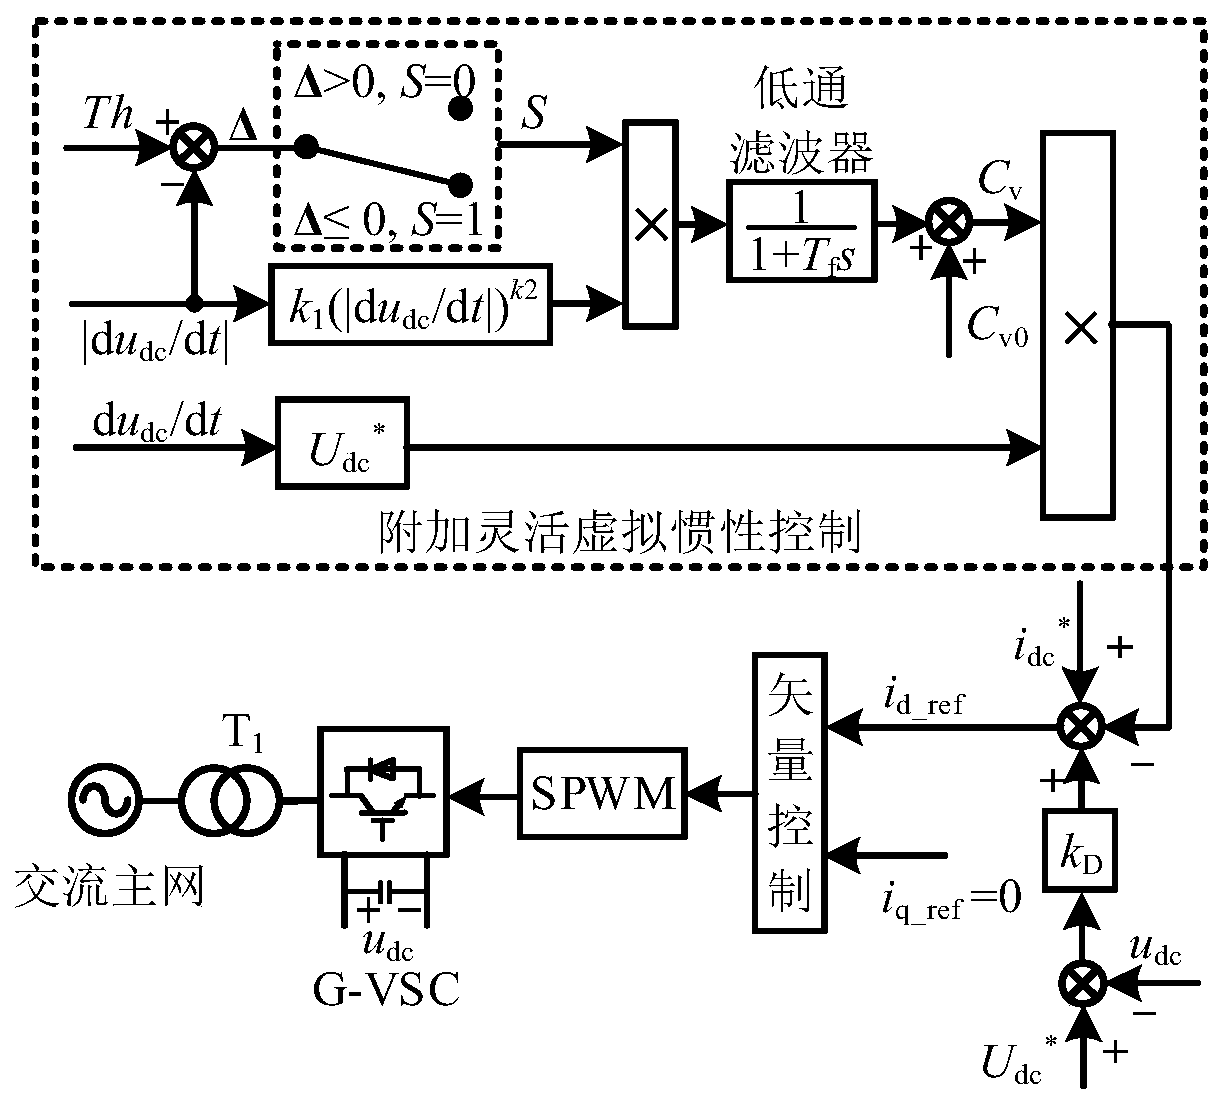 Flexible virtual capacitance control method for stabilizing DC microgrid bus voltage fluctuation